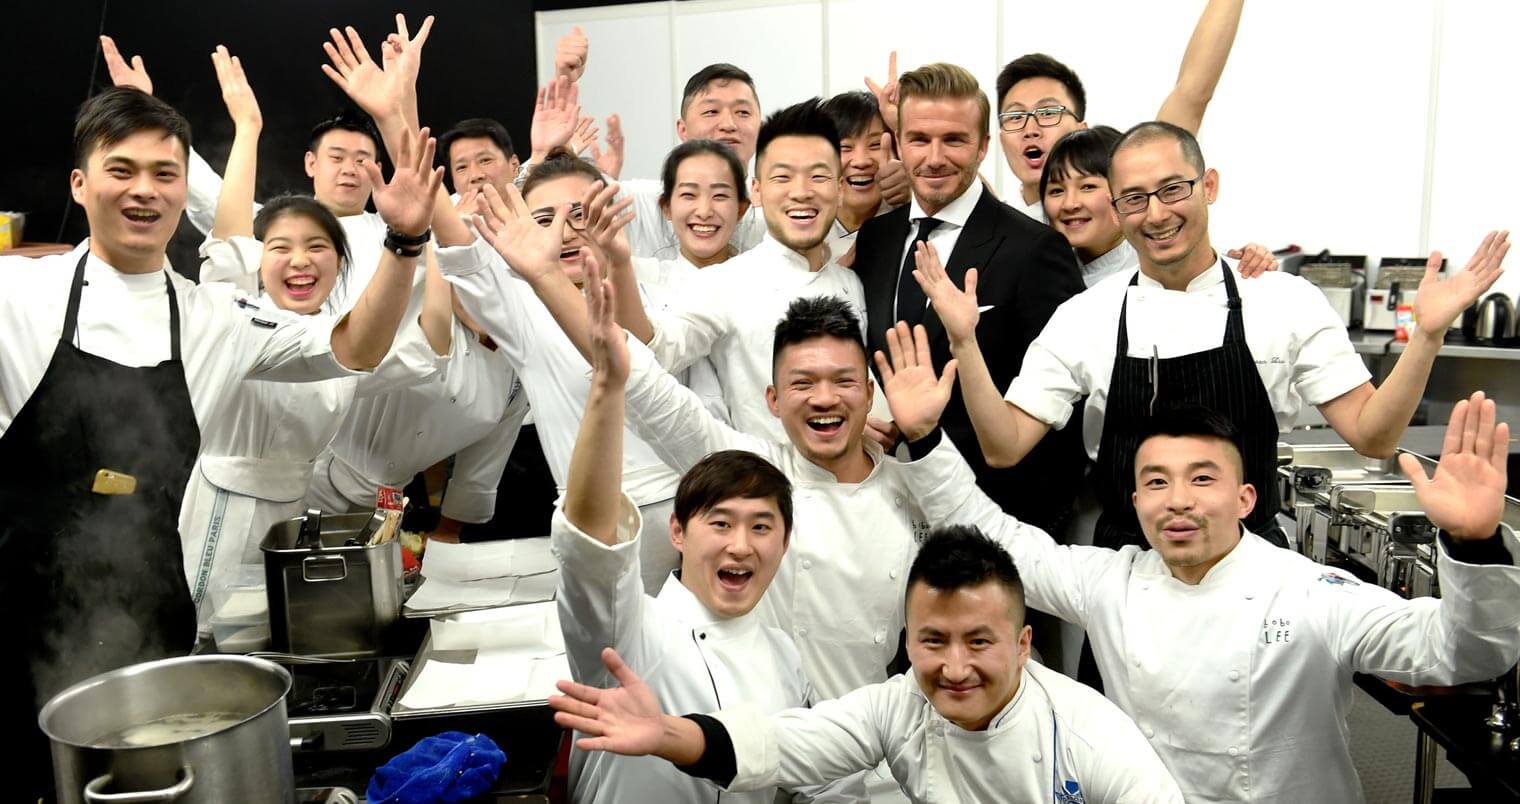 David Beckham Welcomes Guests to Haig Club Shanghai, celebrity, featured image